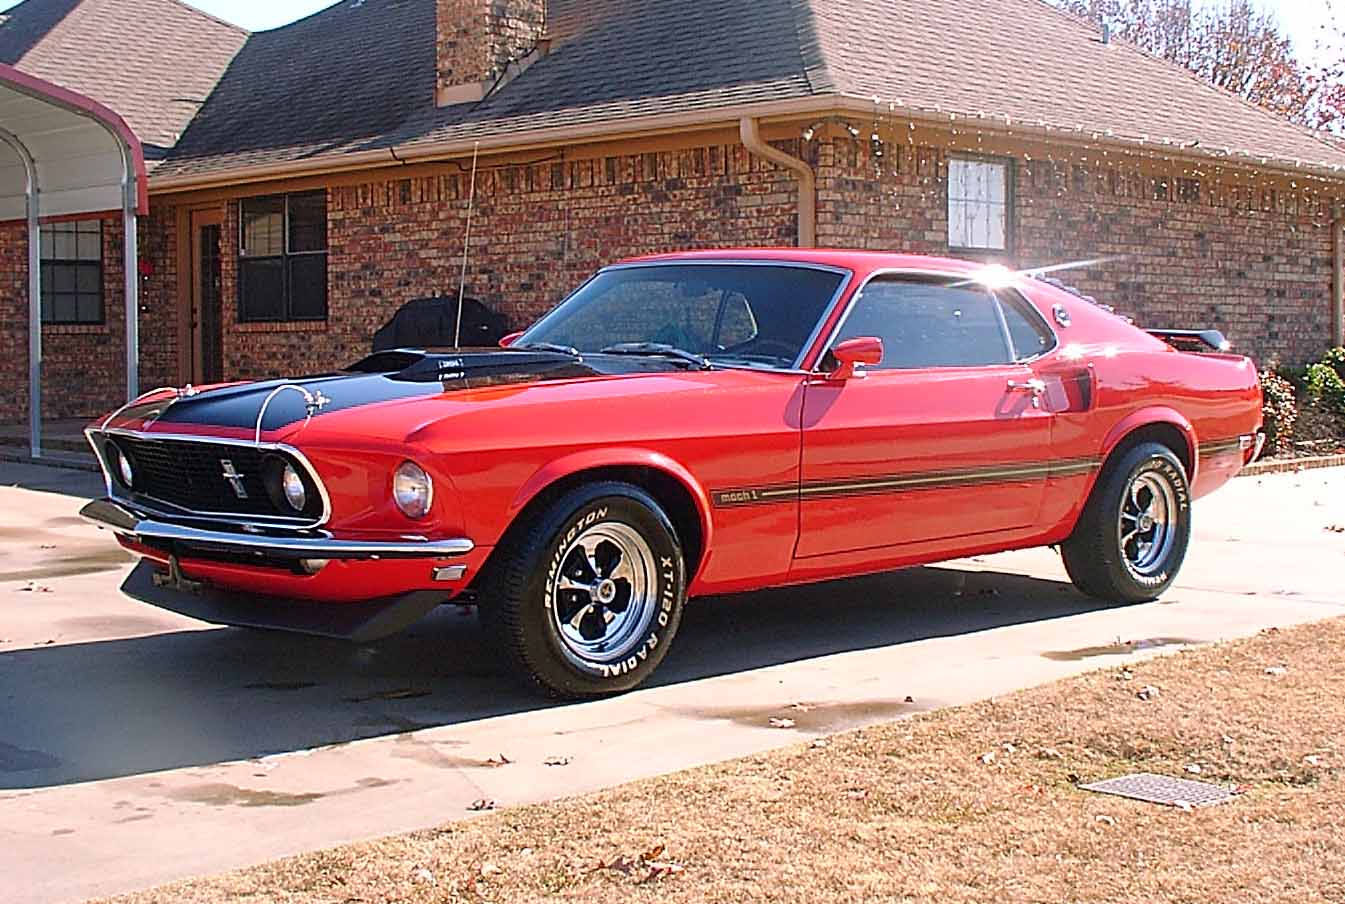 1969_ford_mustang_shelby_gt500-pic-22249.jpeg